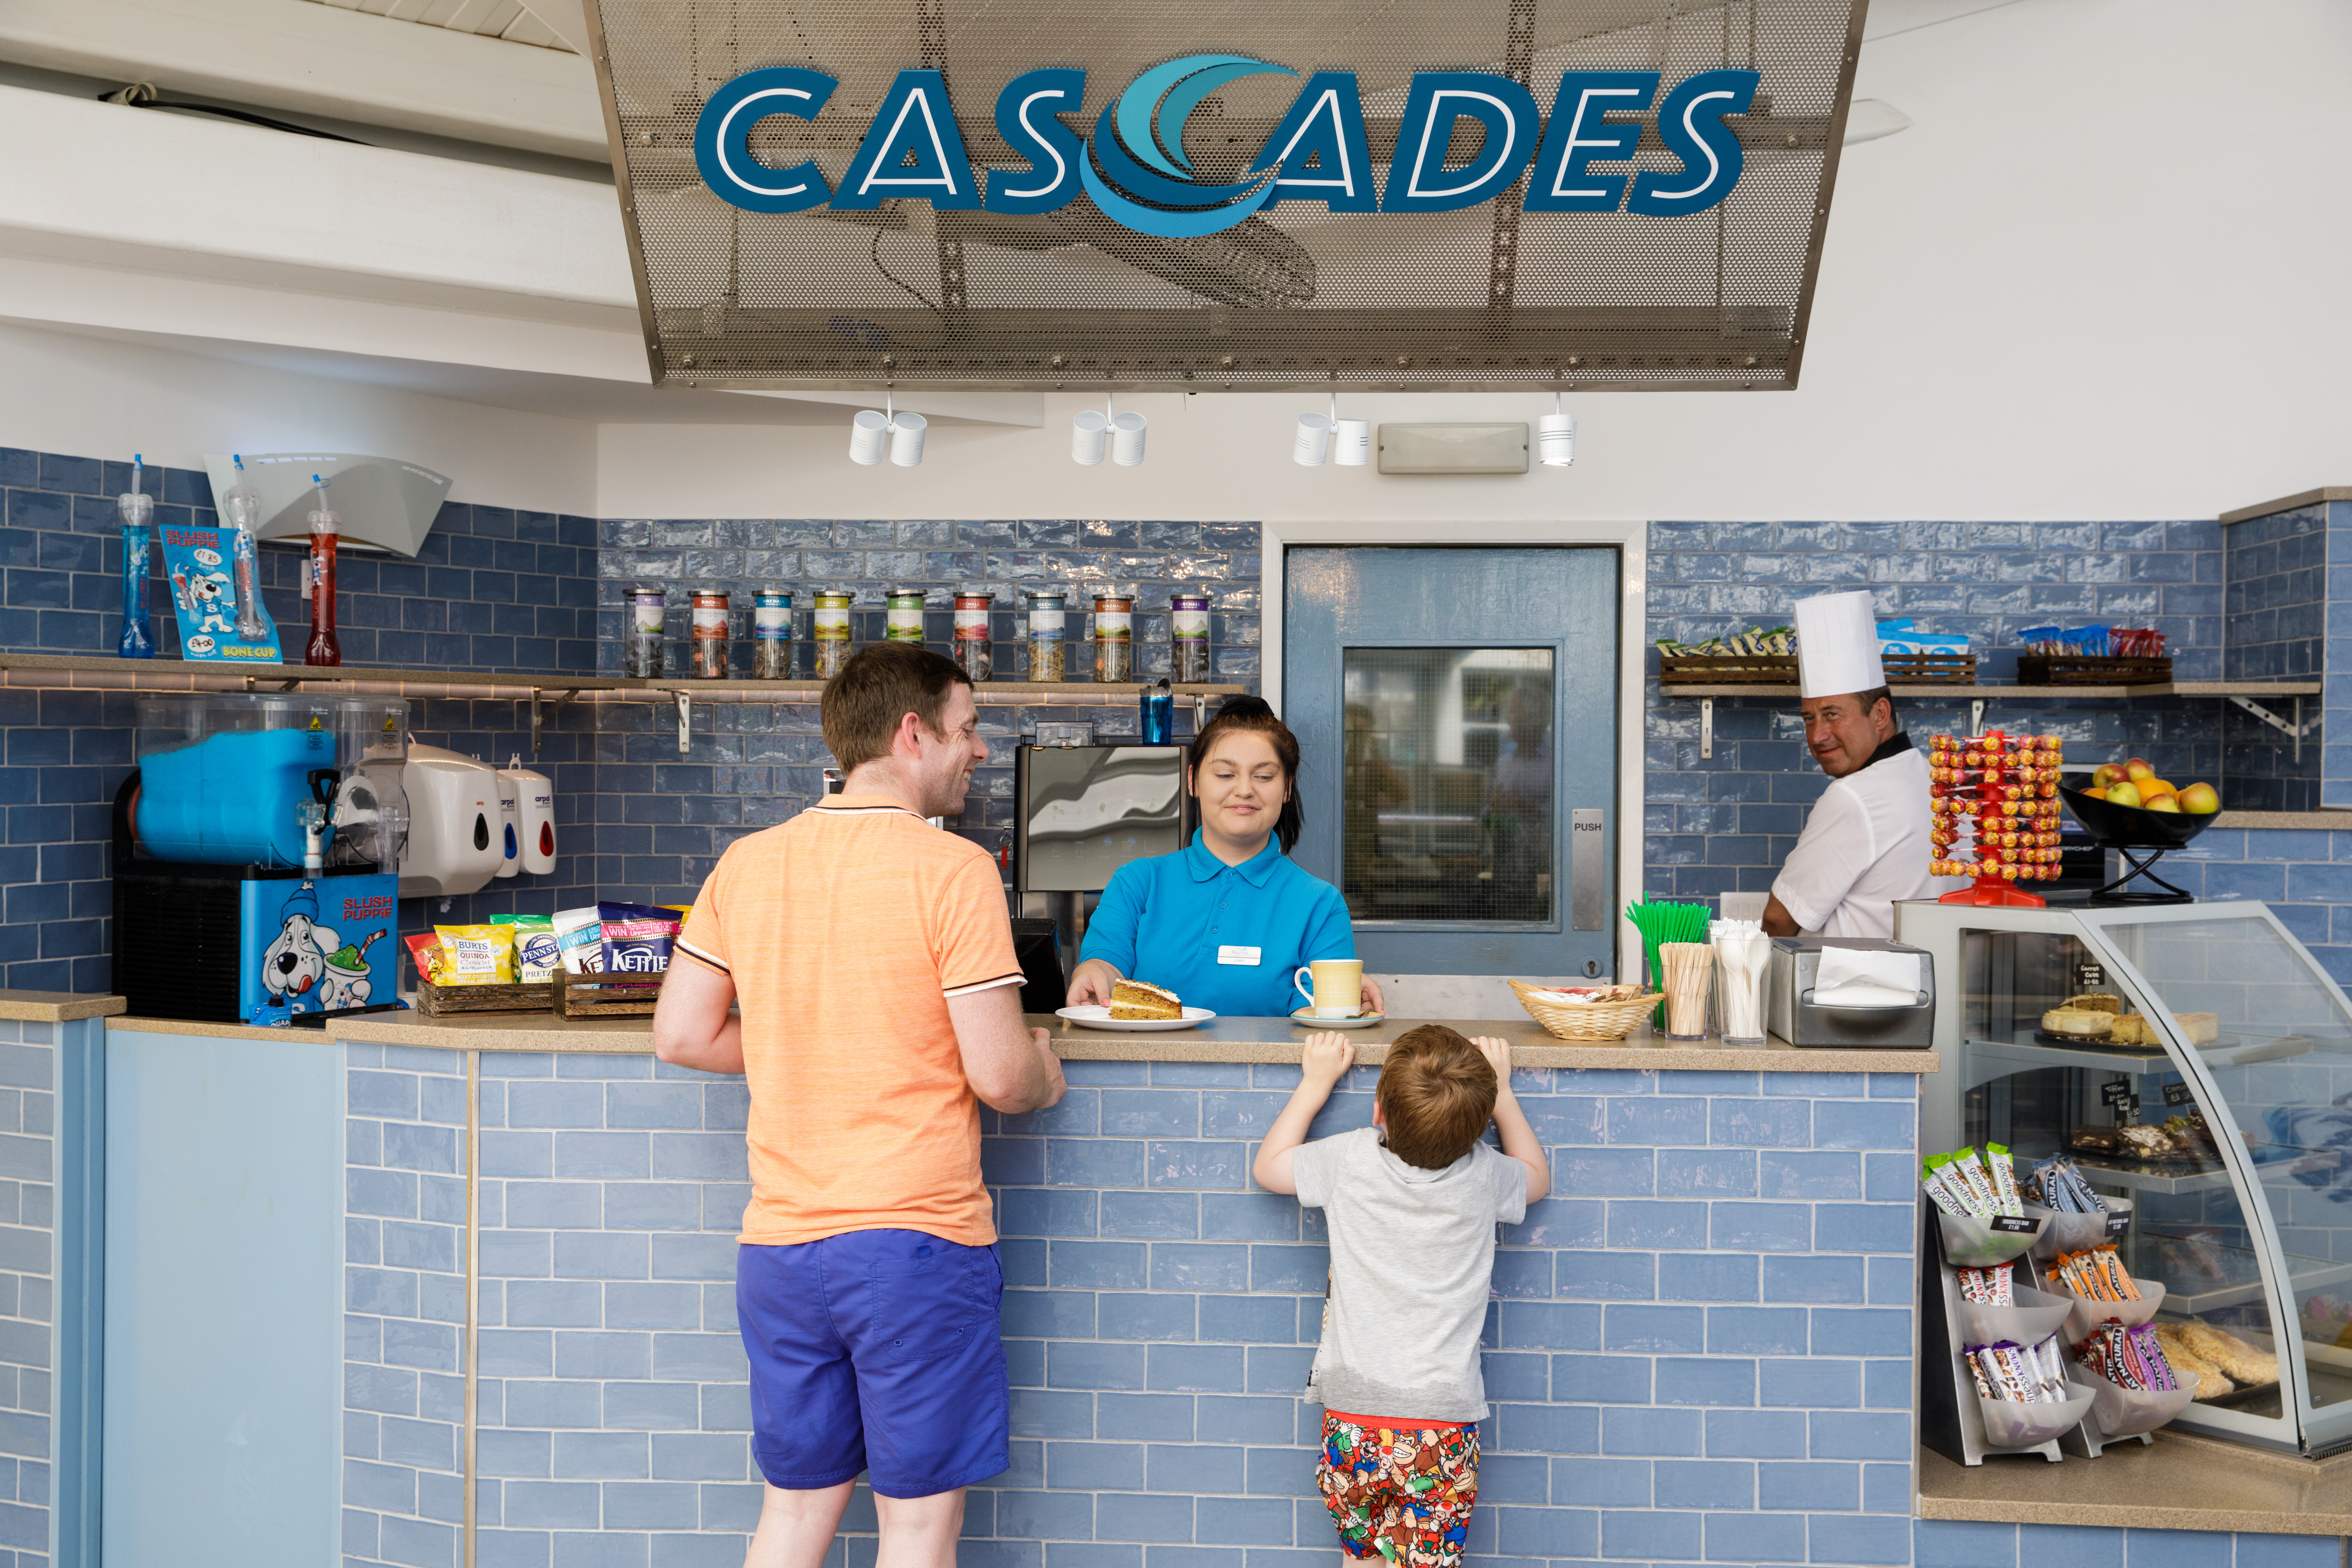 Dine by the pool at the new style Cascades Café